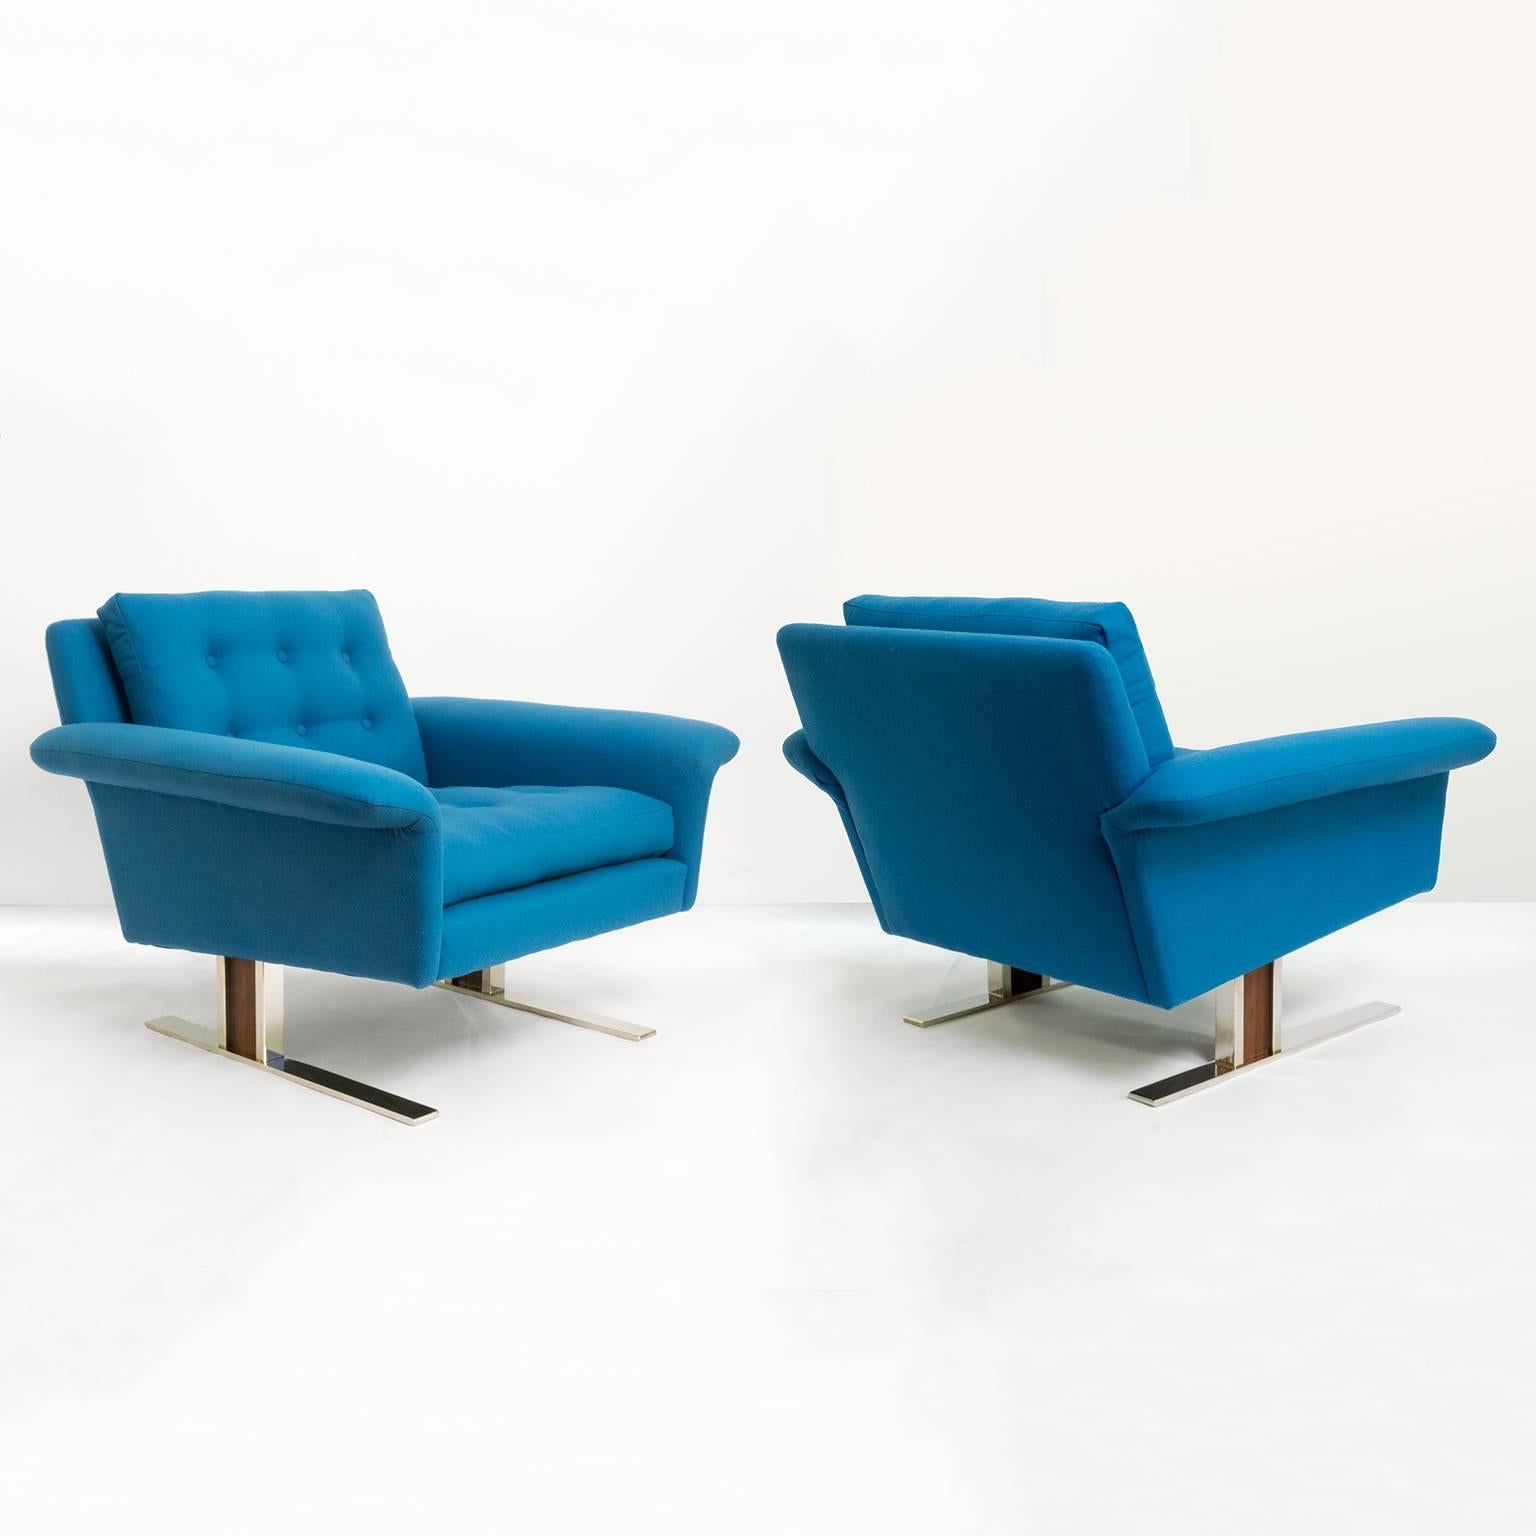 A pair of roomy, stylish and very comfortable Scandinavian Modern armchairs. Newly upholstered in azure blue 100% wool fabric with seat and back cushions detailed with buttons. Legs are solid polished steel with an insert of Rosewood. Designed by